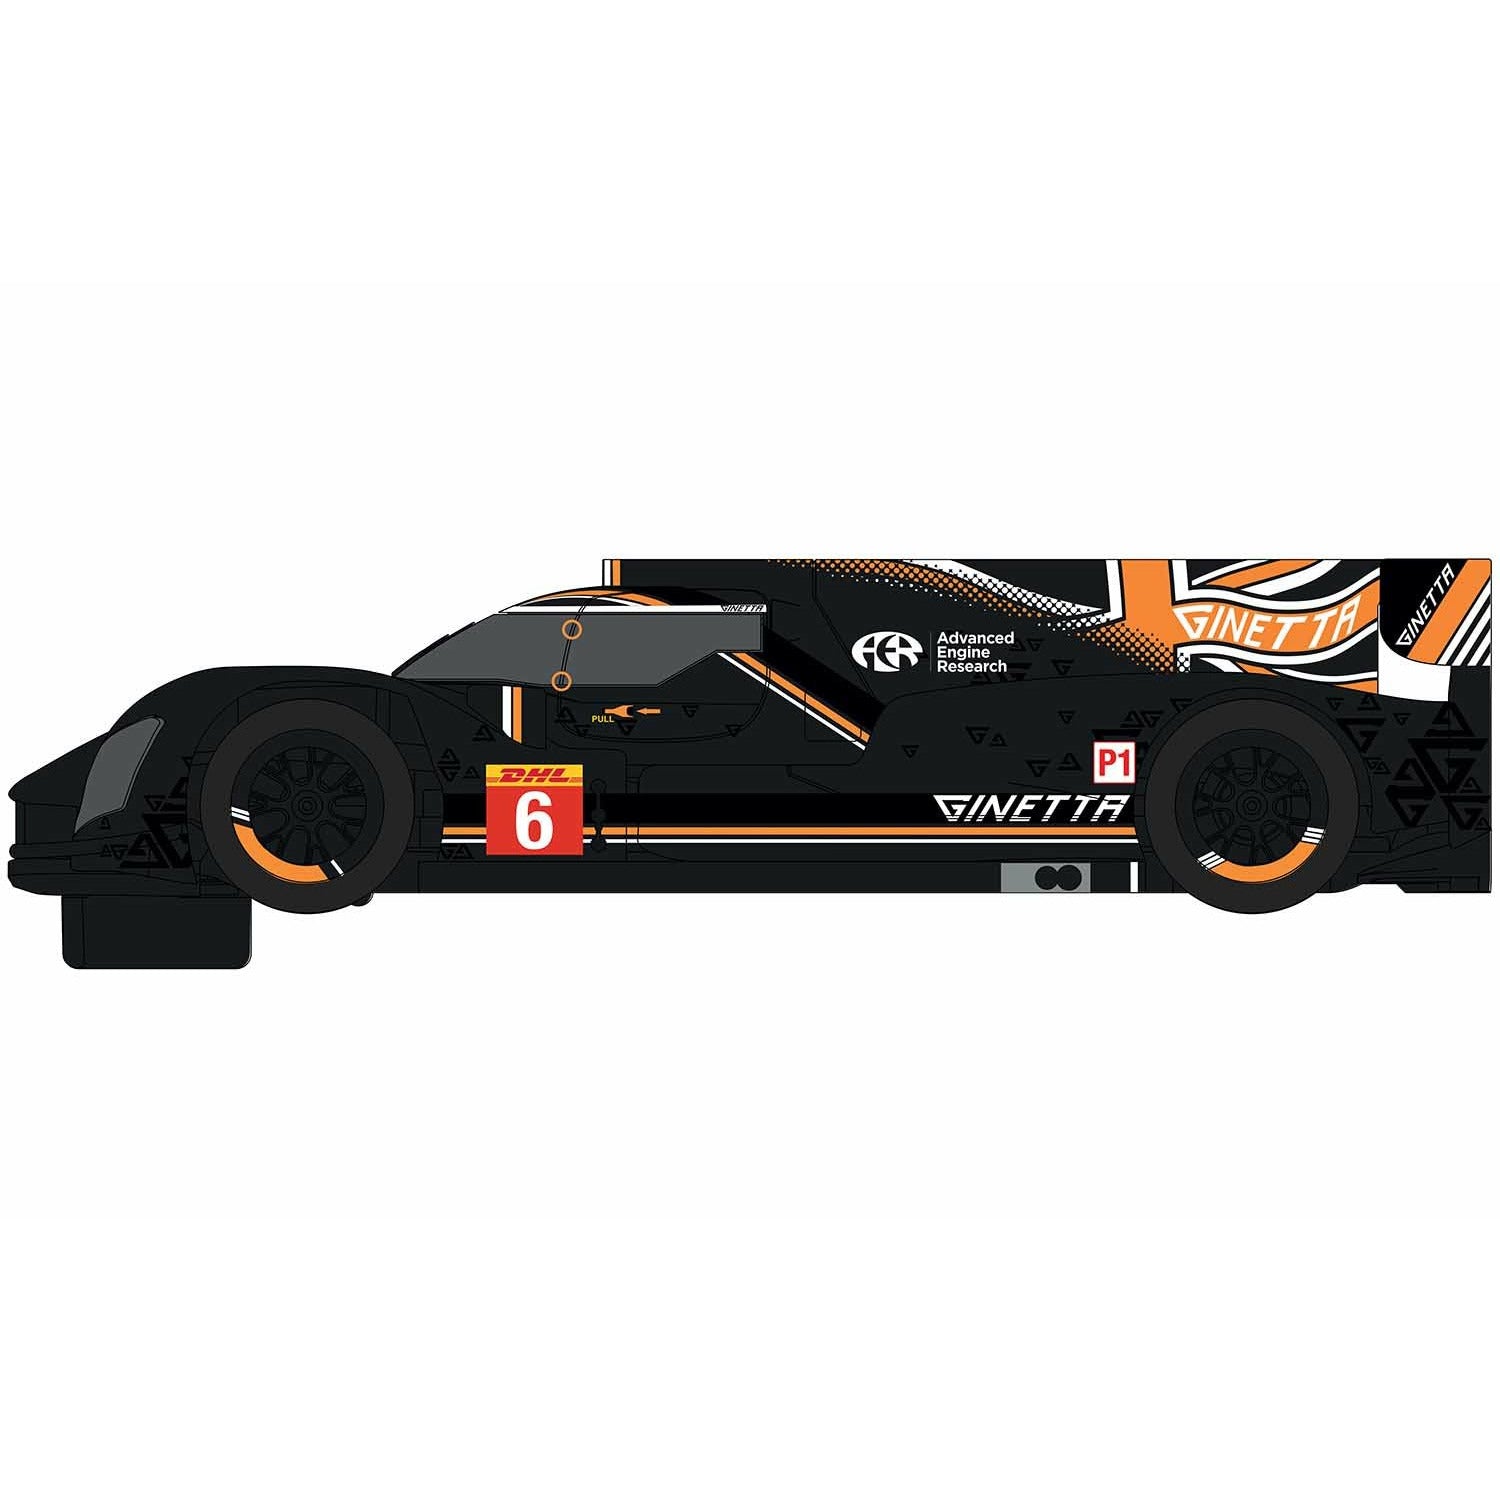 Ginetta G60-LT-P1 Silverstone 4 Hours 2019 Scalextric Slot Car